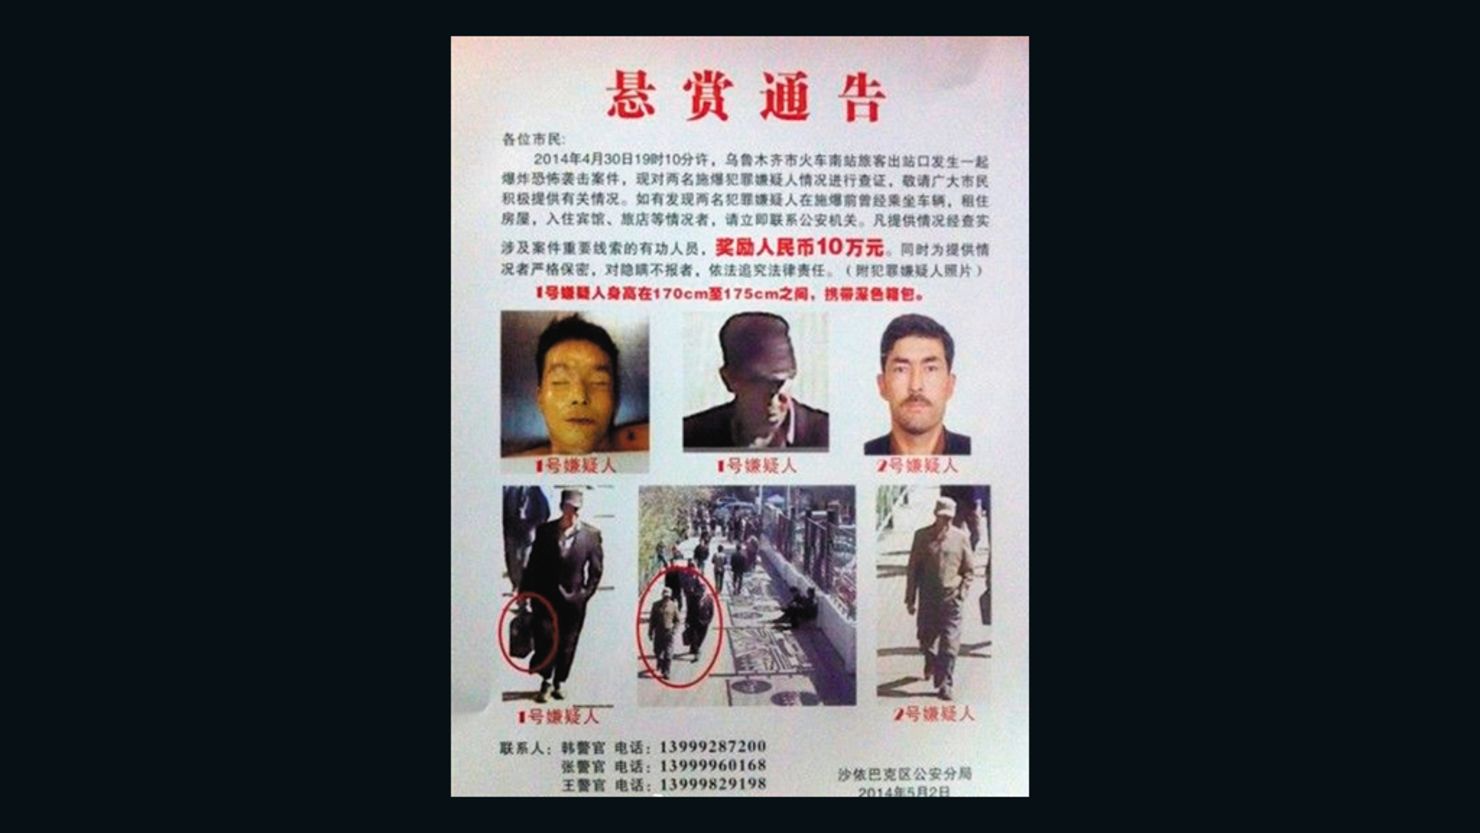 A police poster asking for information on the suspects of the April 30 Xinjiang railway bombing.